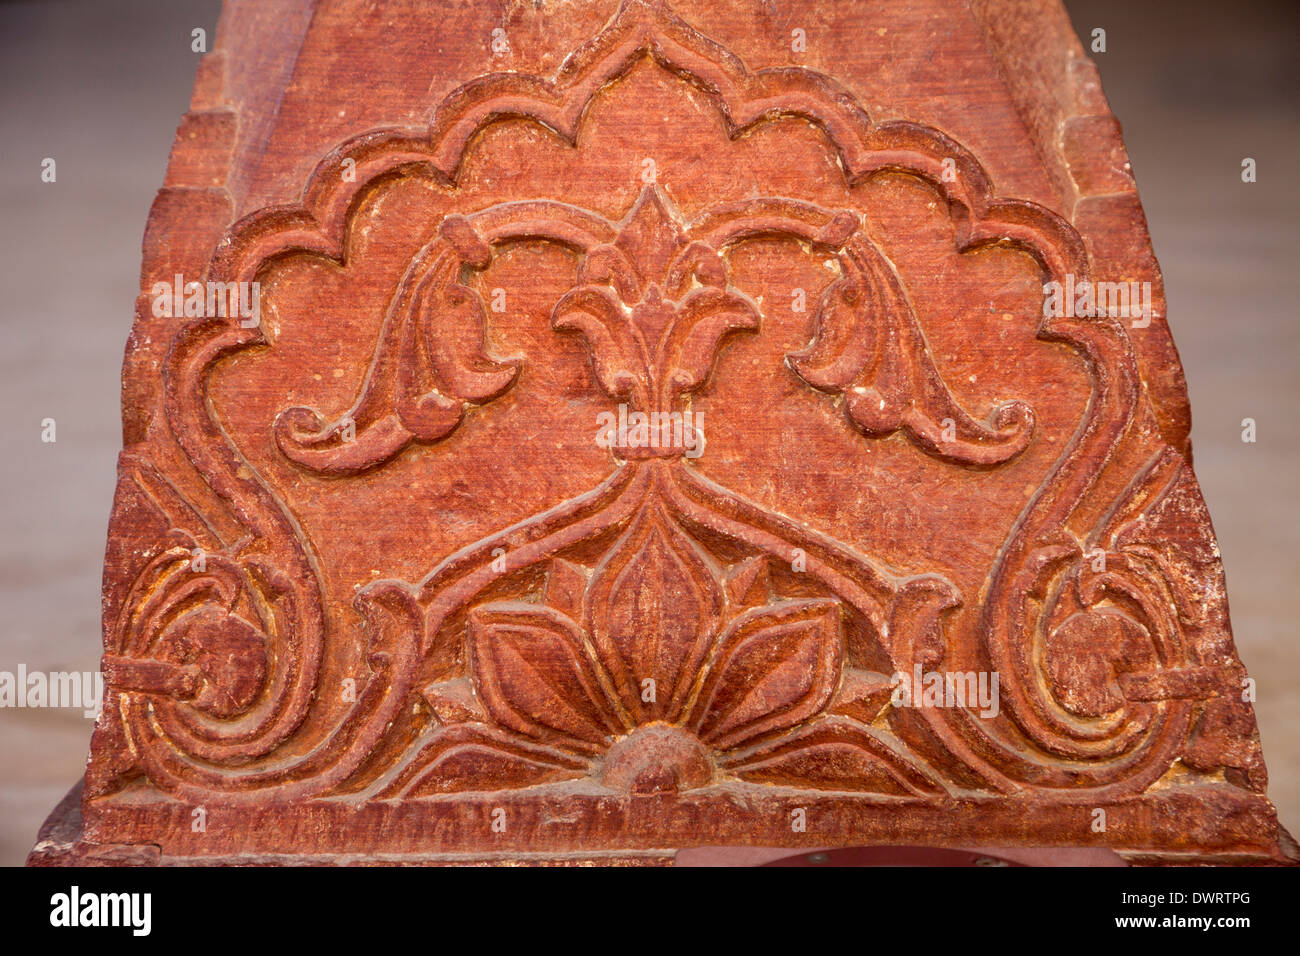 Jaipur, Rajasthan, India. Islamic Floral Motifs on the Base of the Columns of the Diwan-i-Am, the Hall of Public Audience. Stock Photo